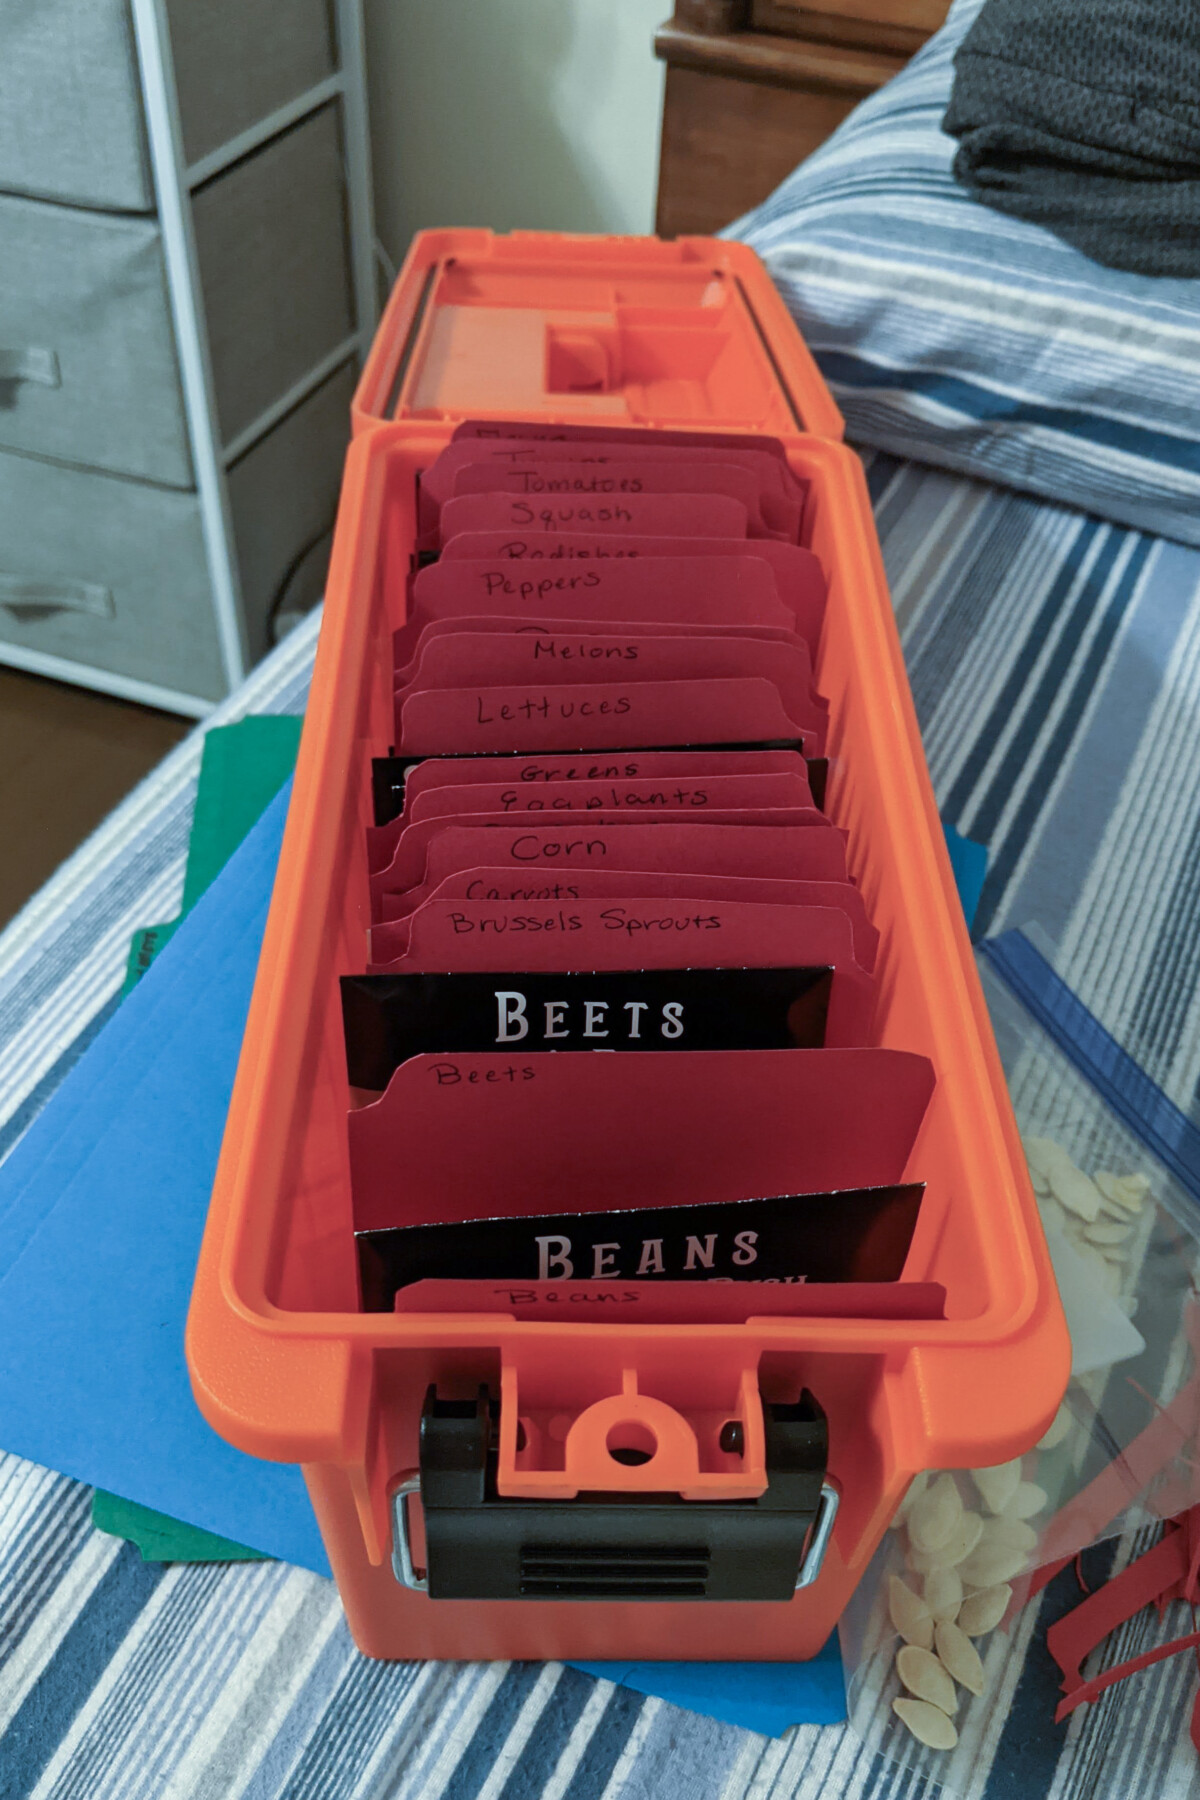  Ammo box repurposed to hold seed packets